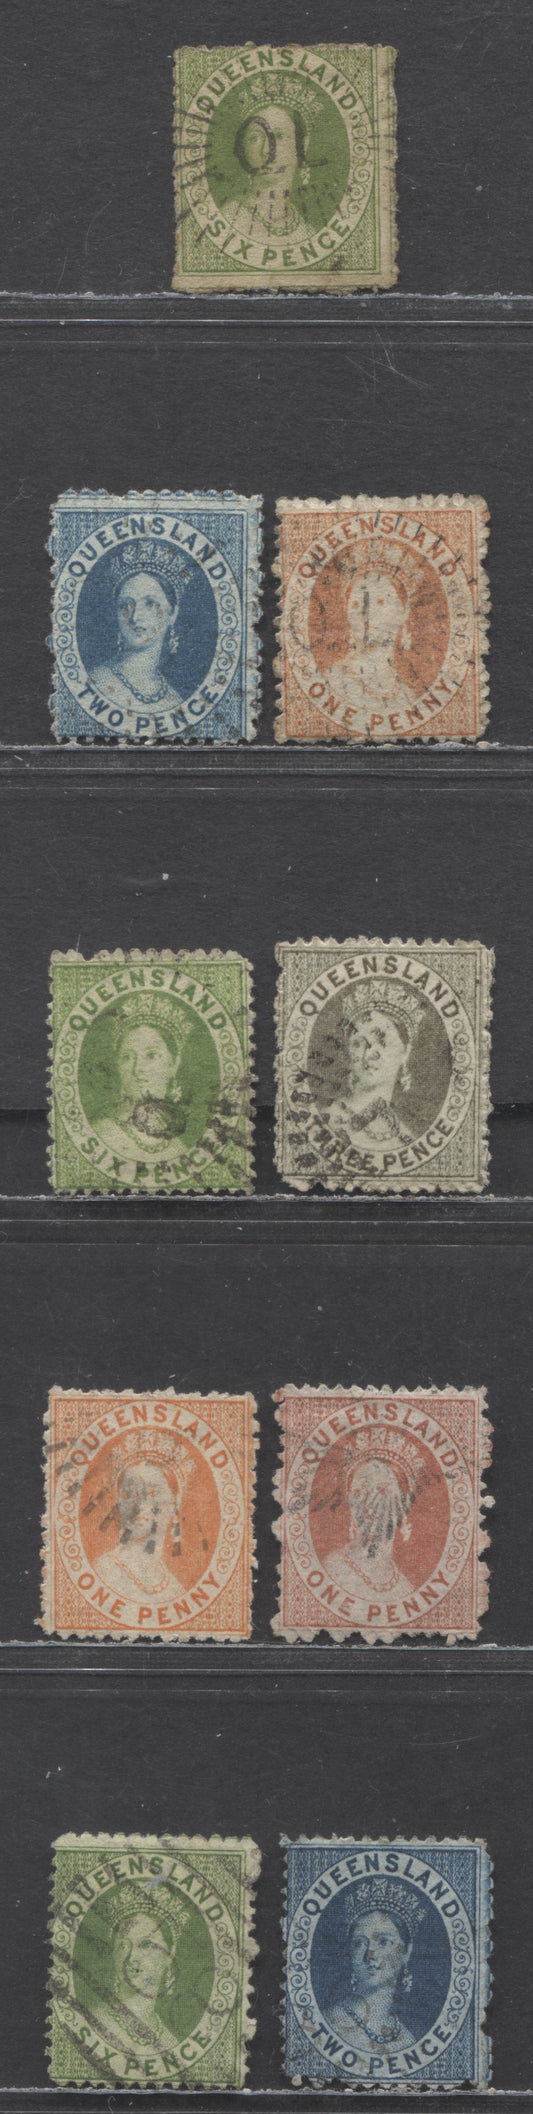 Lot 90 Australian States - Queensland SC#16/44 1862-1878 Chalon Heads Issue, Various Watermarks & Perfs, 9 Very Good/Fine Used Singles, Click on Listing to See ALL Pictures, Estimated Value $25